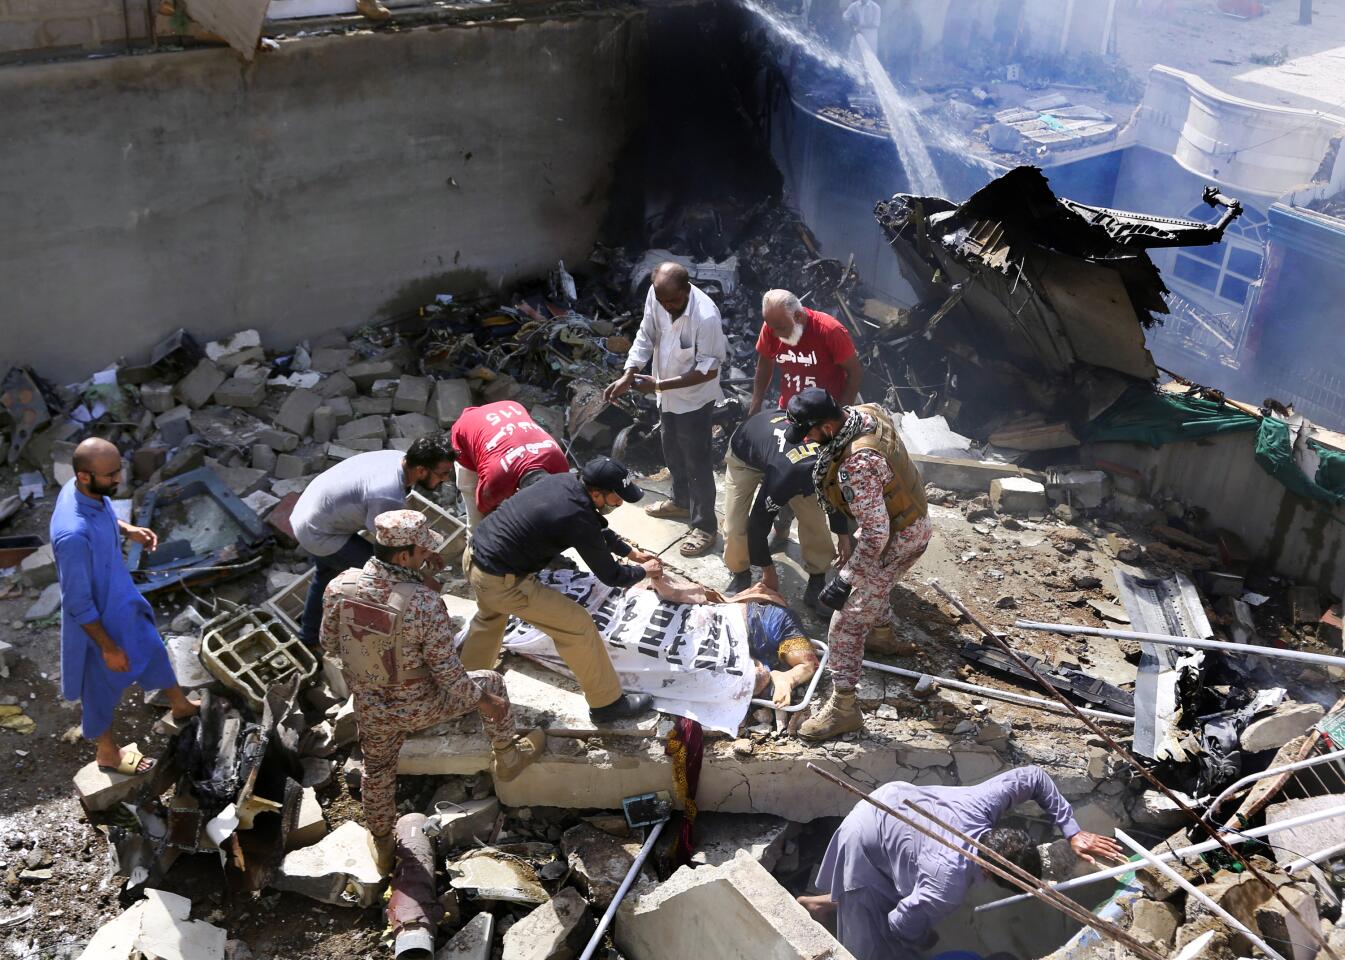 Workers prepare to remove the body of a victim removed from the wreckage of an airliner that crashed in a neighborhood near the Karachi, Pakistan, airport on Friday.